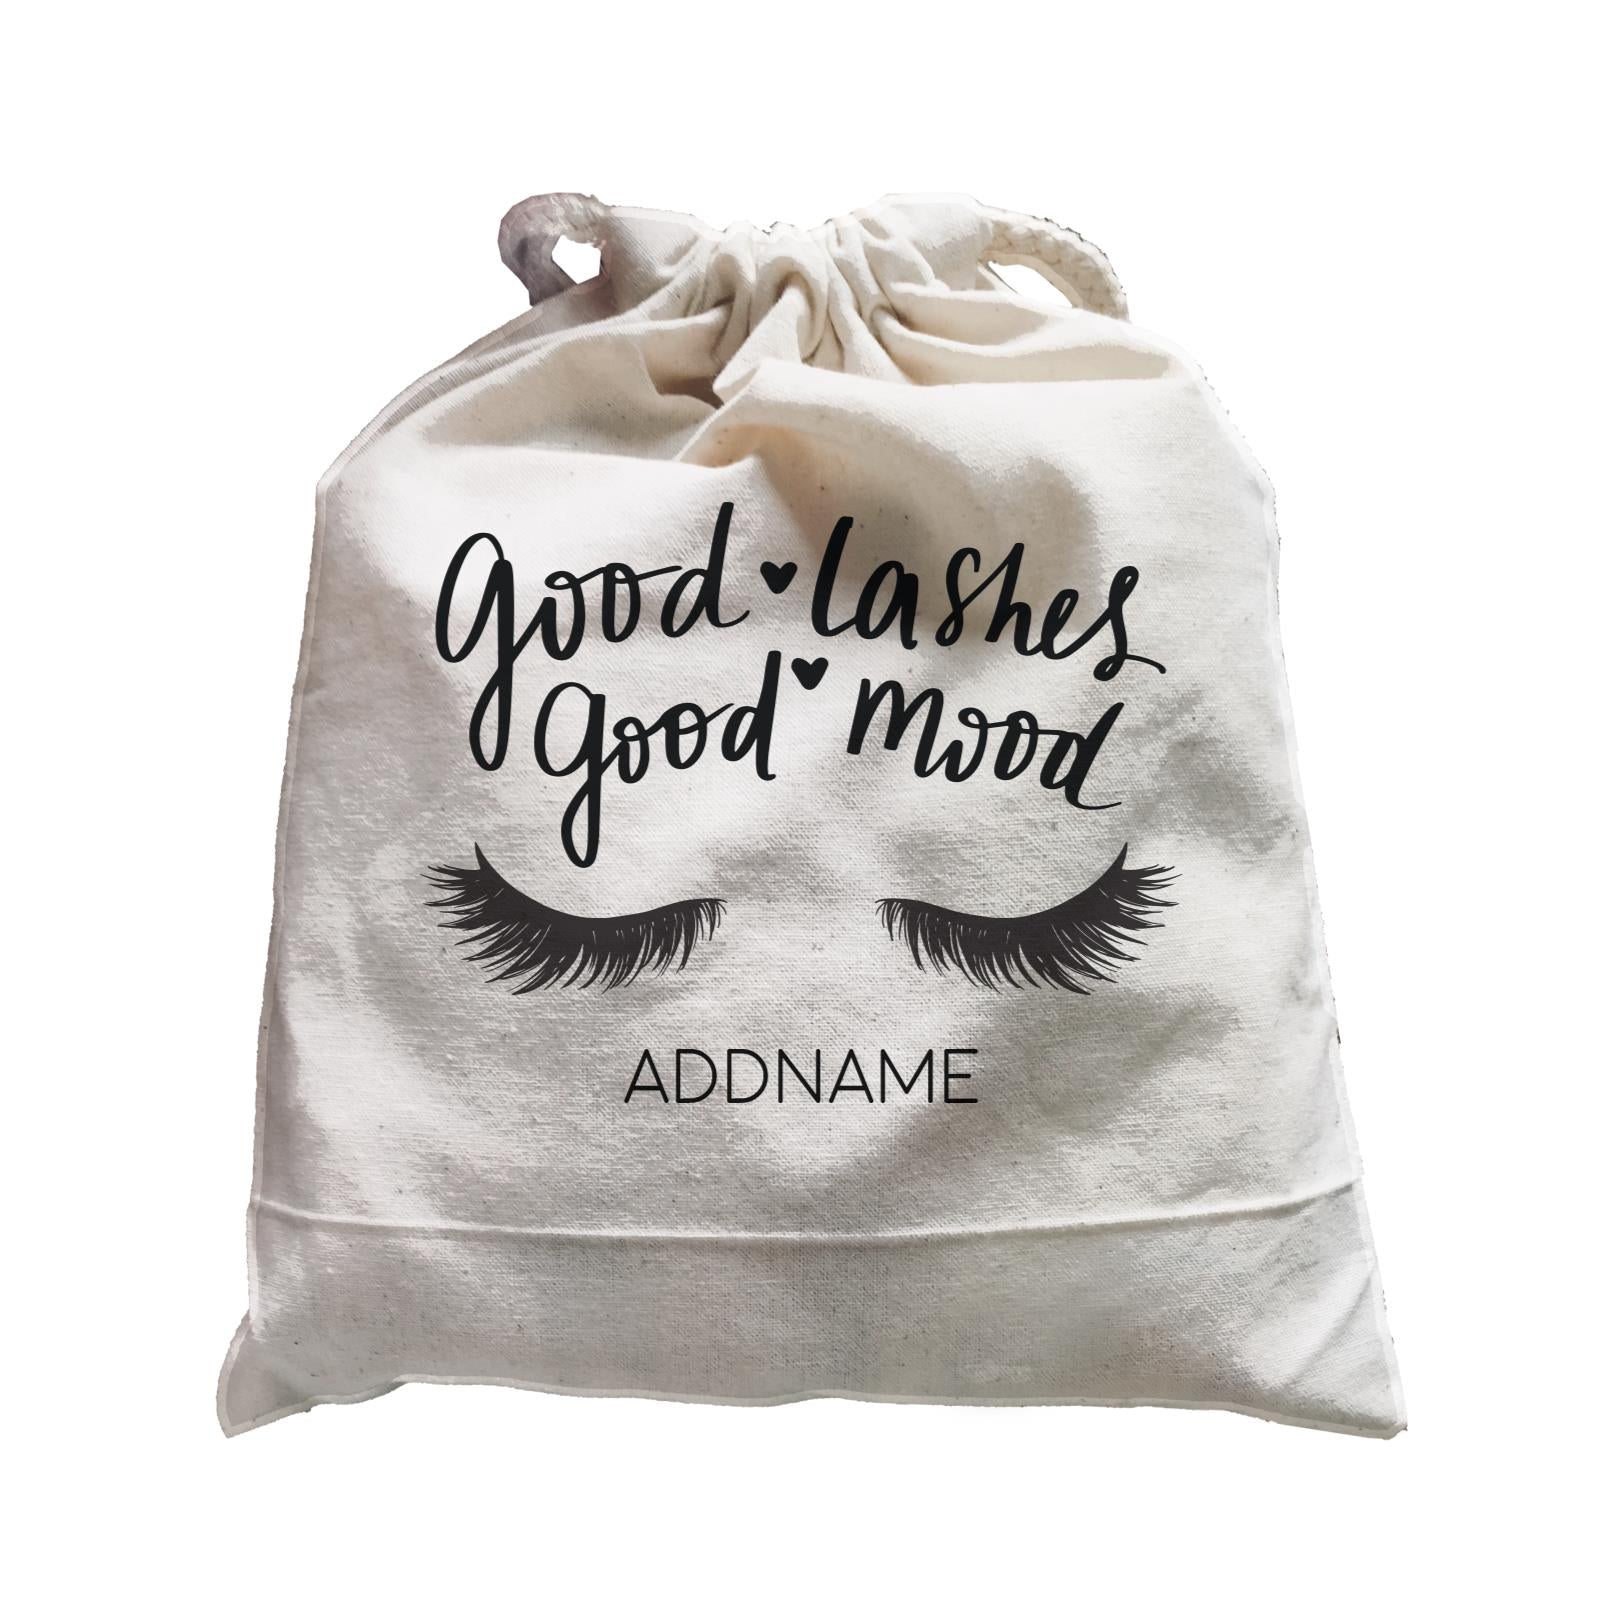 Make Up Quotes Good Lashes Good Mood Addname Satchel